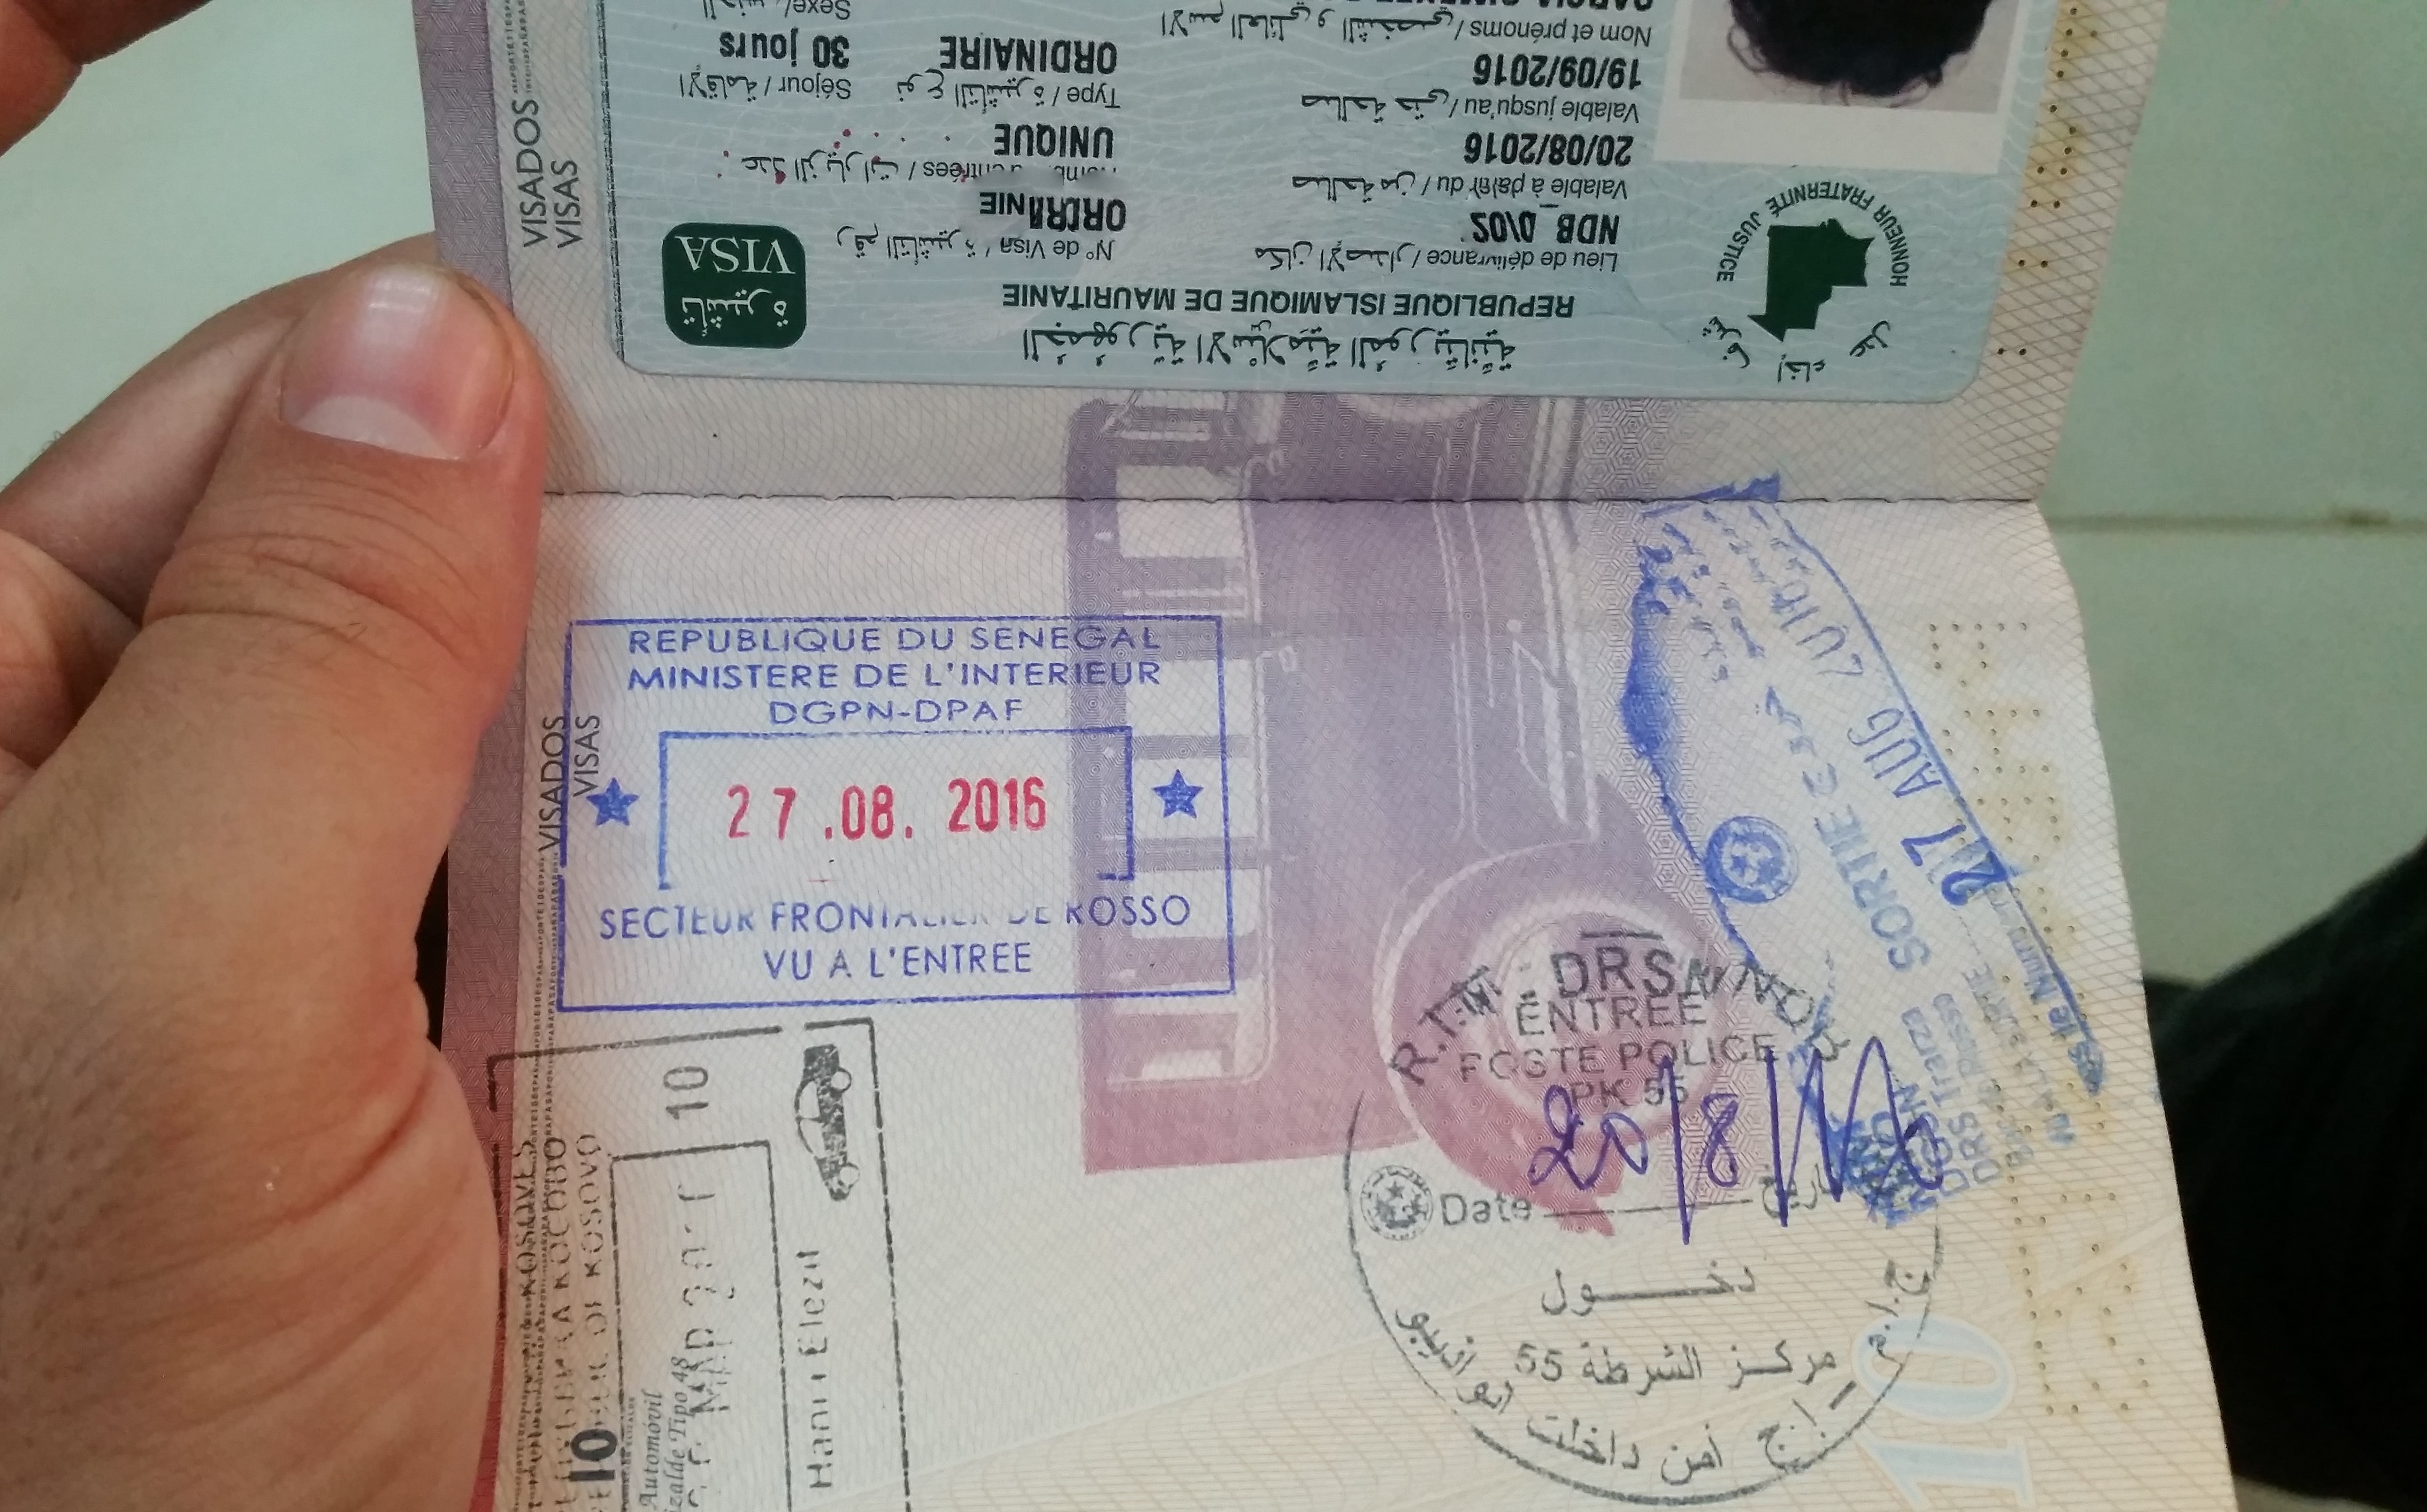 Passport with stamps and visas